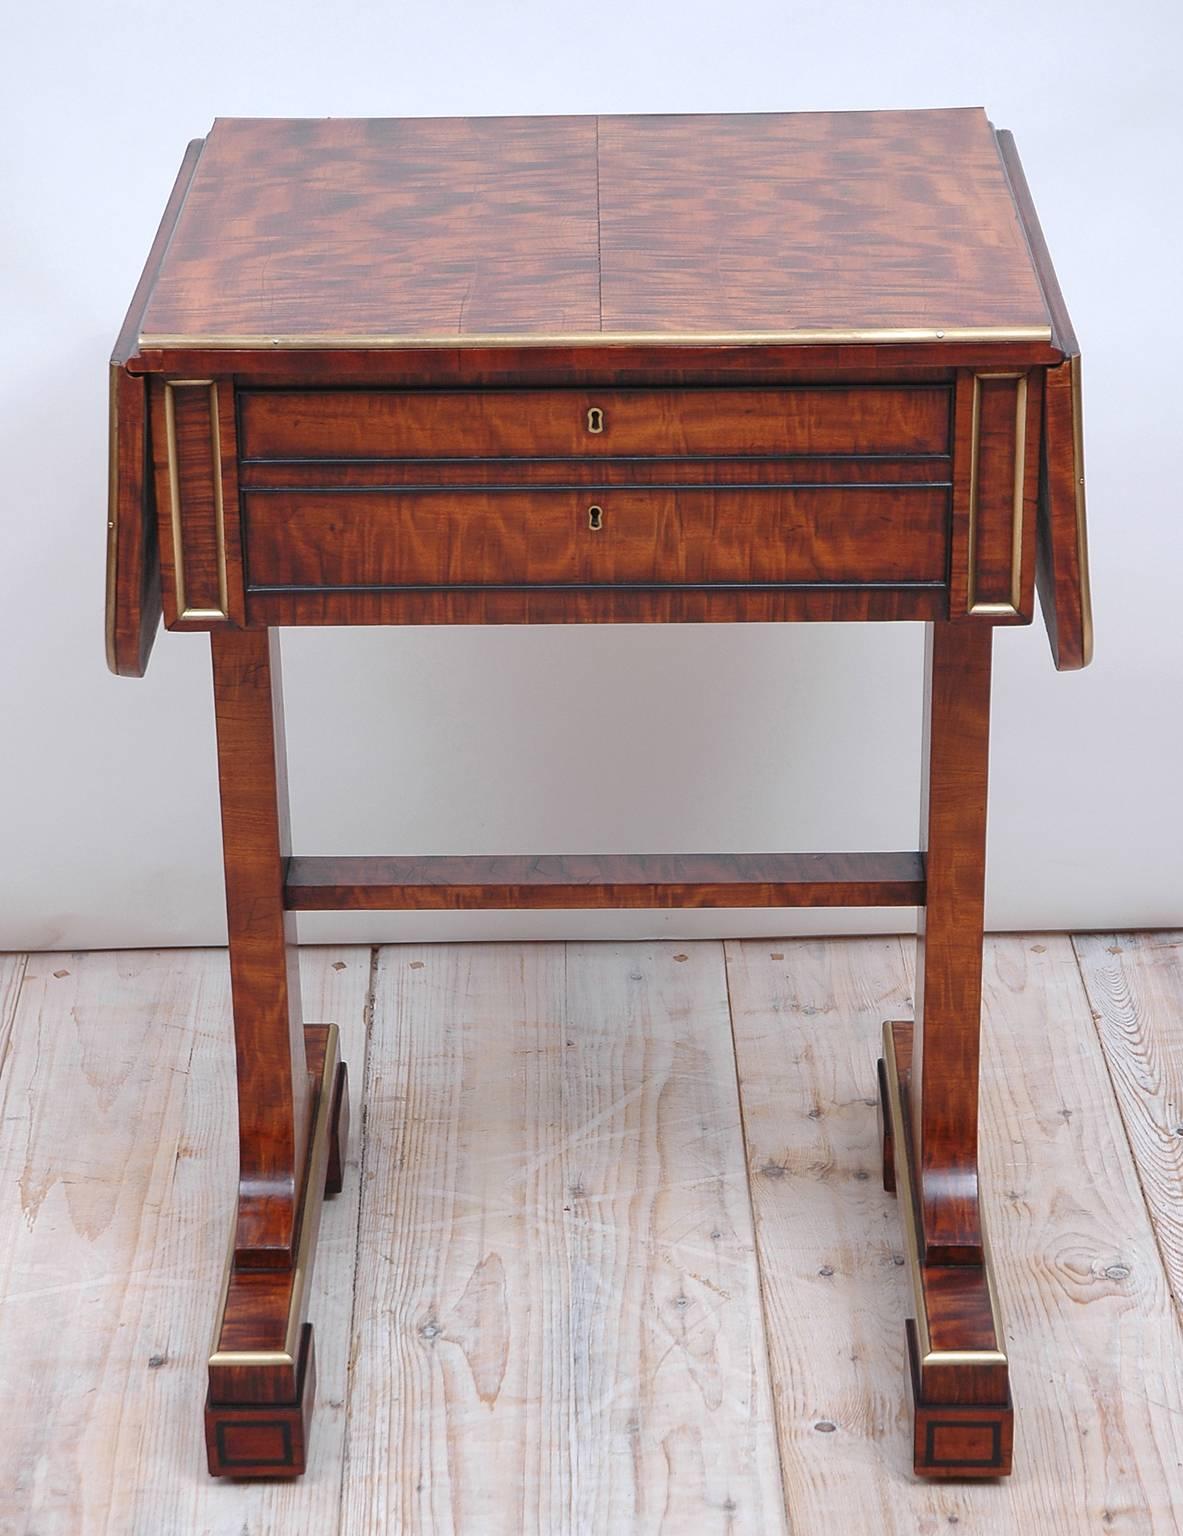 A fine English Regency work or side table on trestle base with drop leaves in beautiful plum mahogany with brass banding on edge of table and ebonized banding around drawers and block feet. Back and front of table are identical with front offering